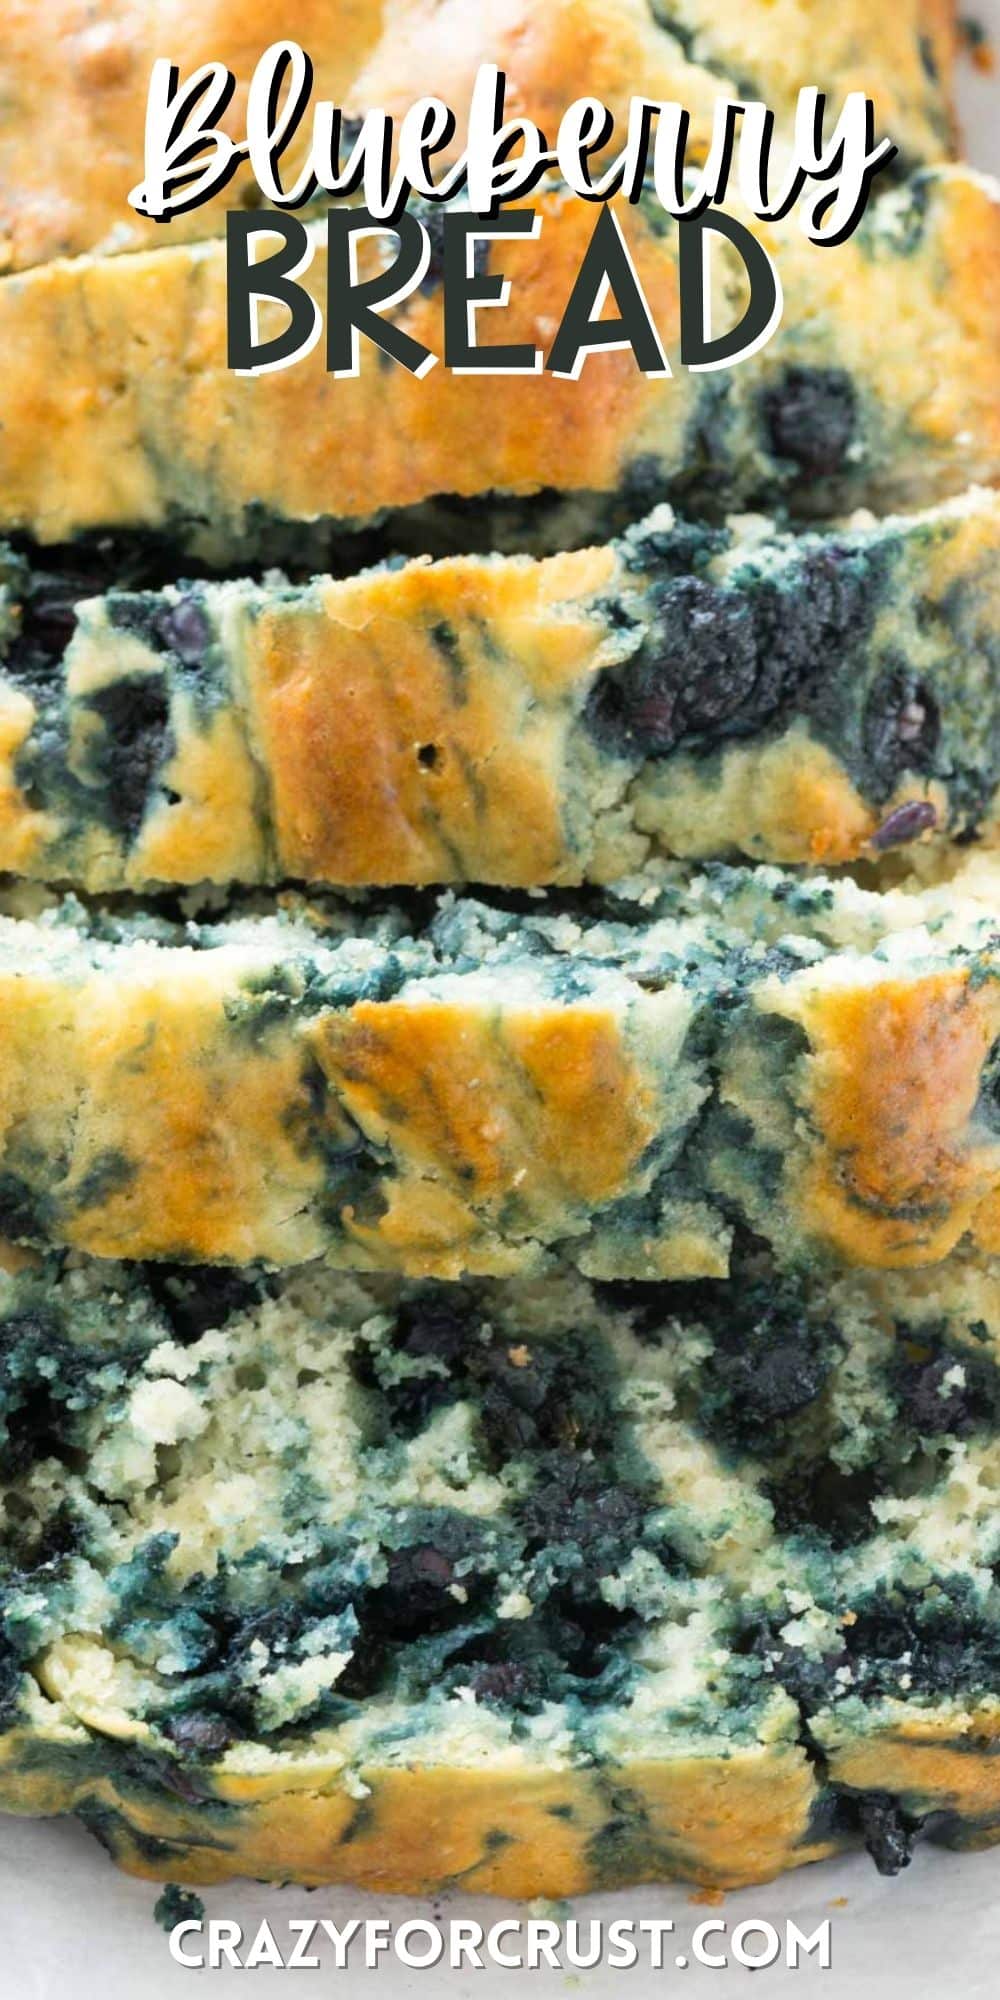 bread with blueberries baked in and words on the image.